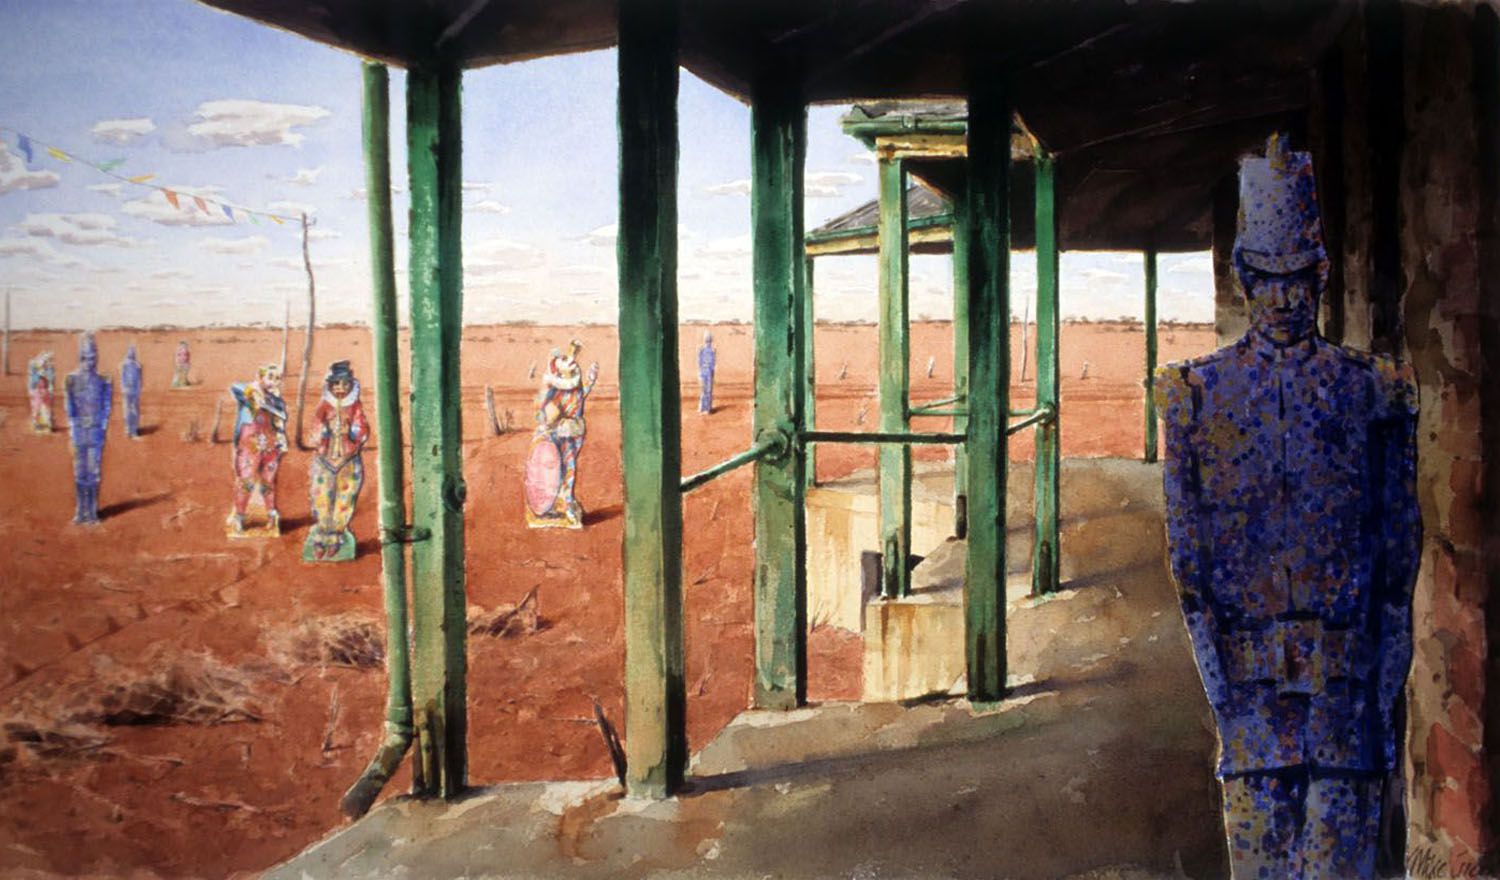 "The Group Outside" 1994. 39 x 70cm